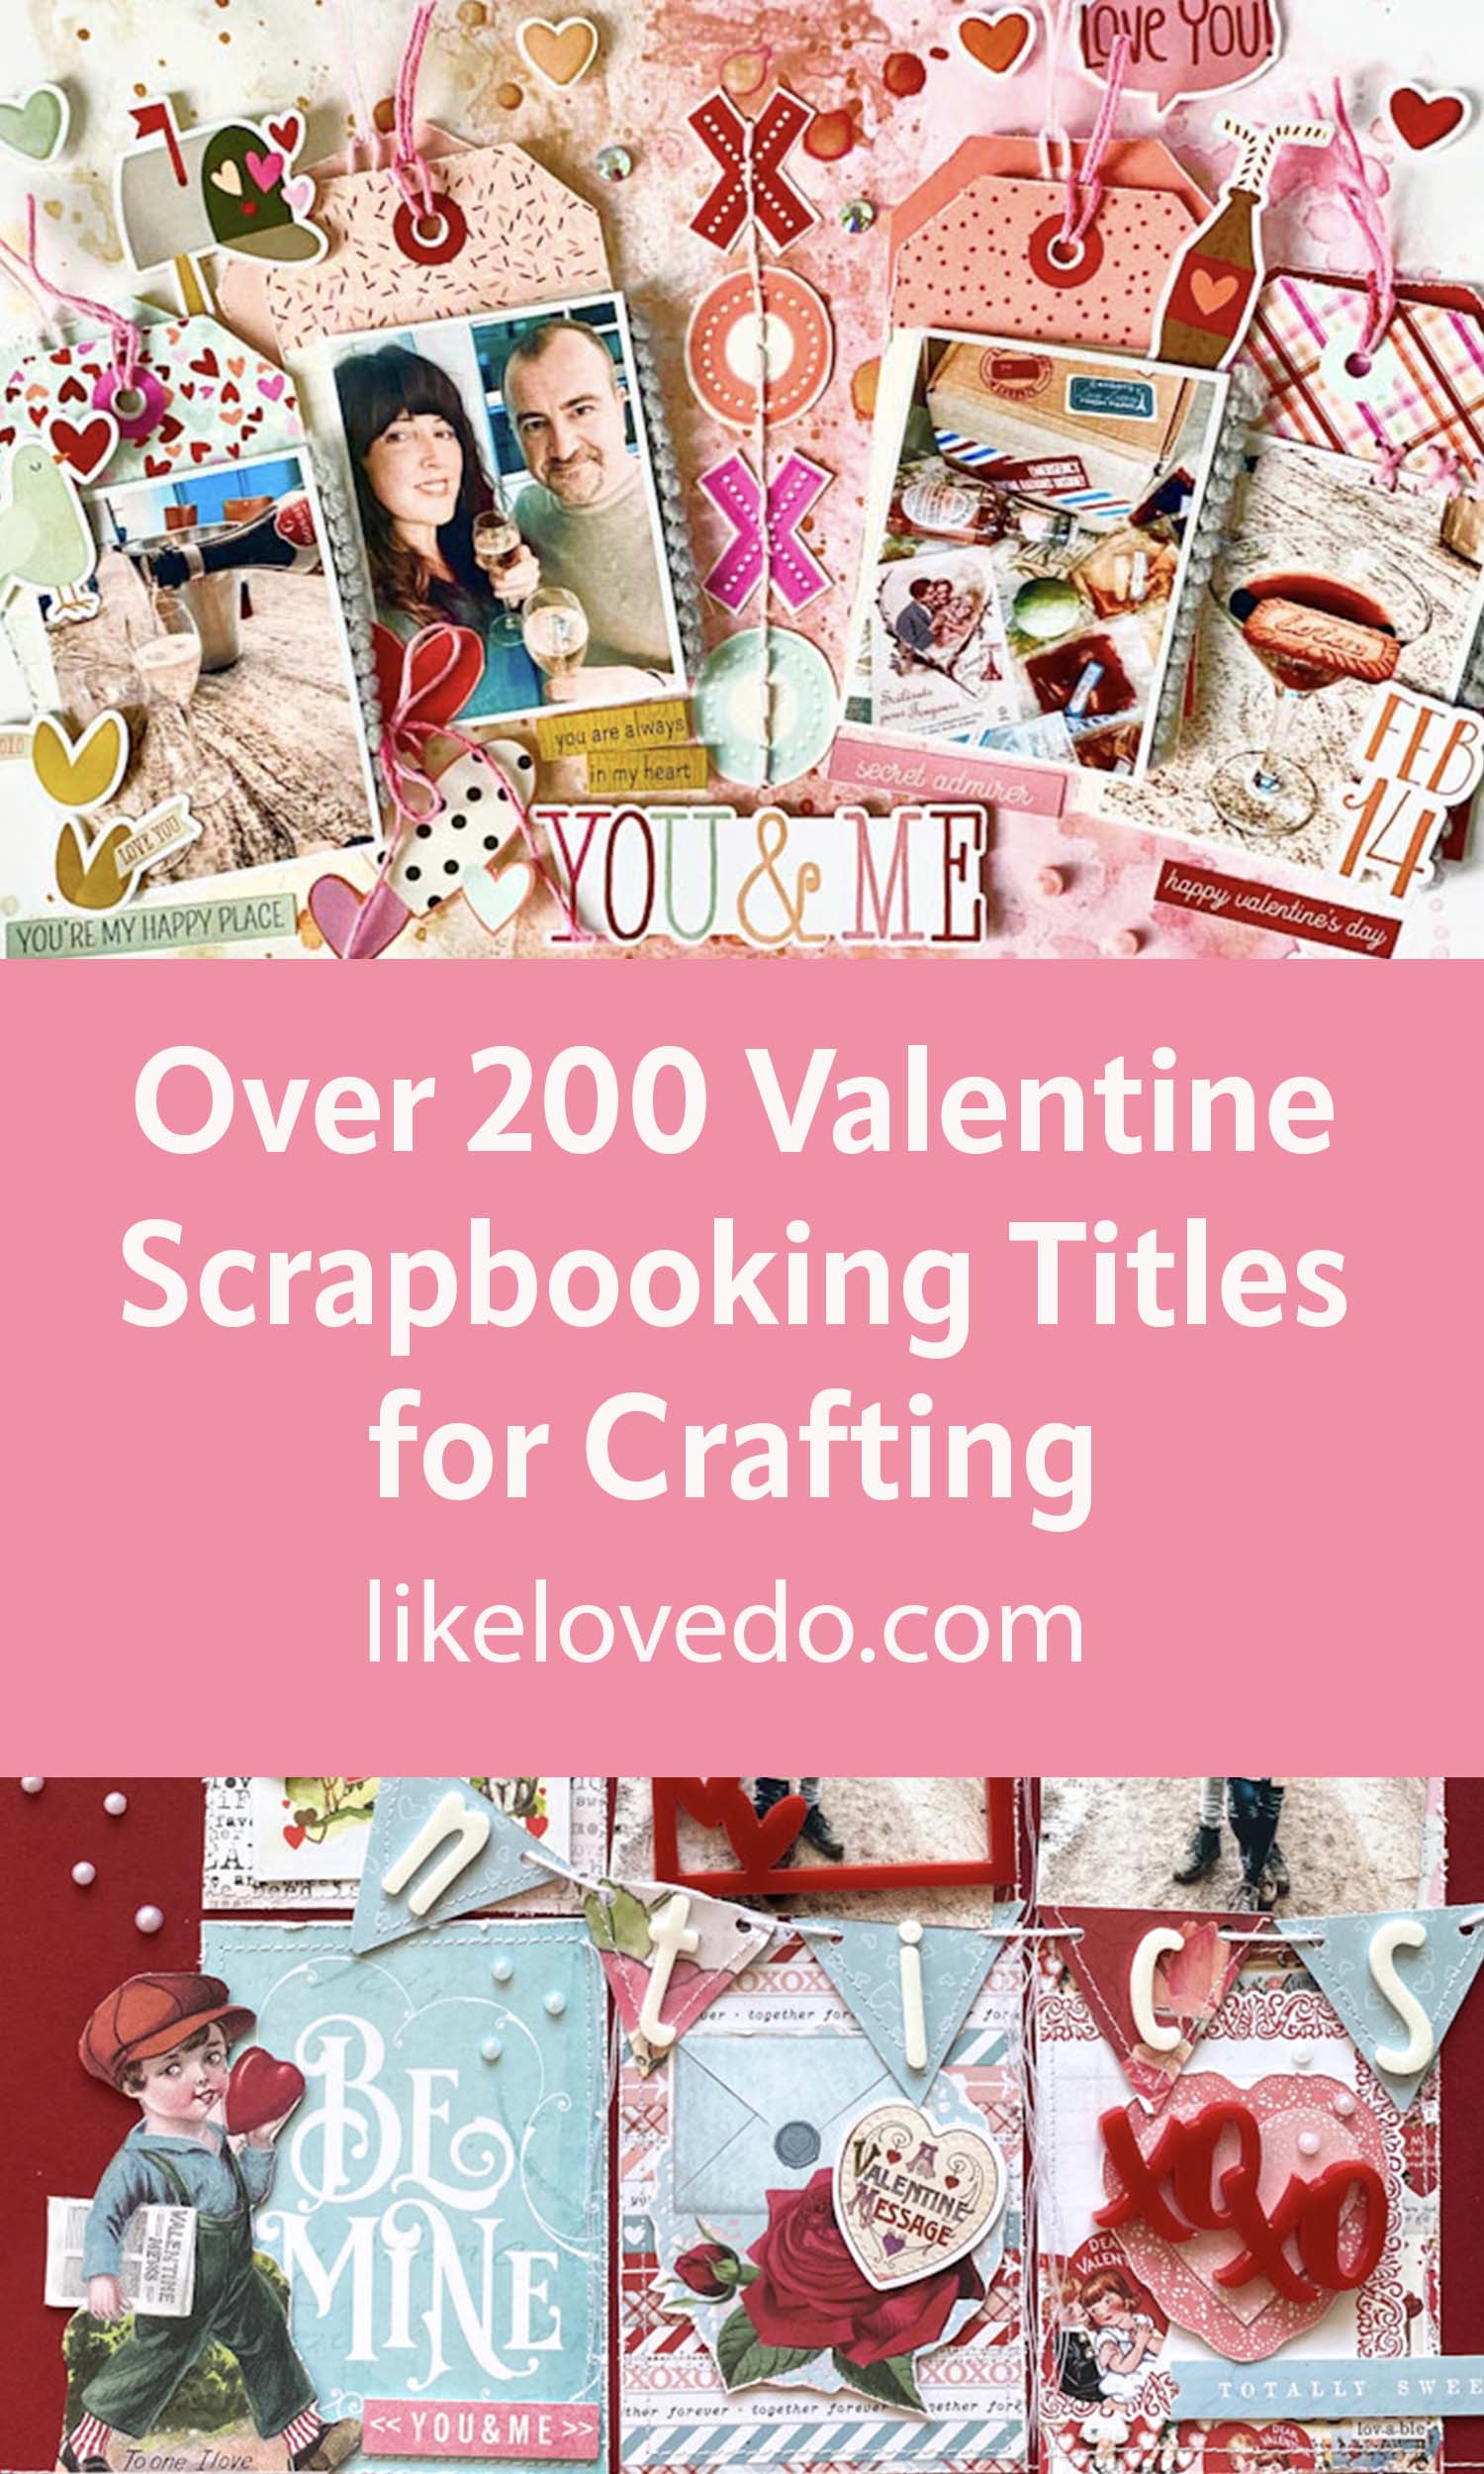 Valentines Titles for Scrapbooking Over 200 crafty love titles for your crafts